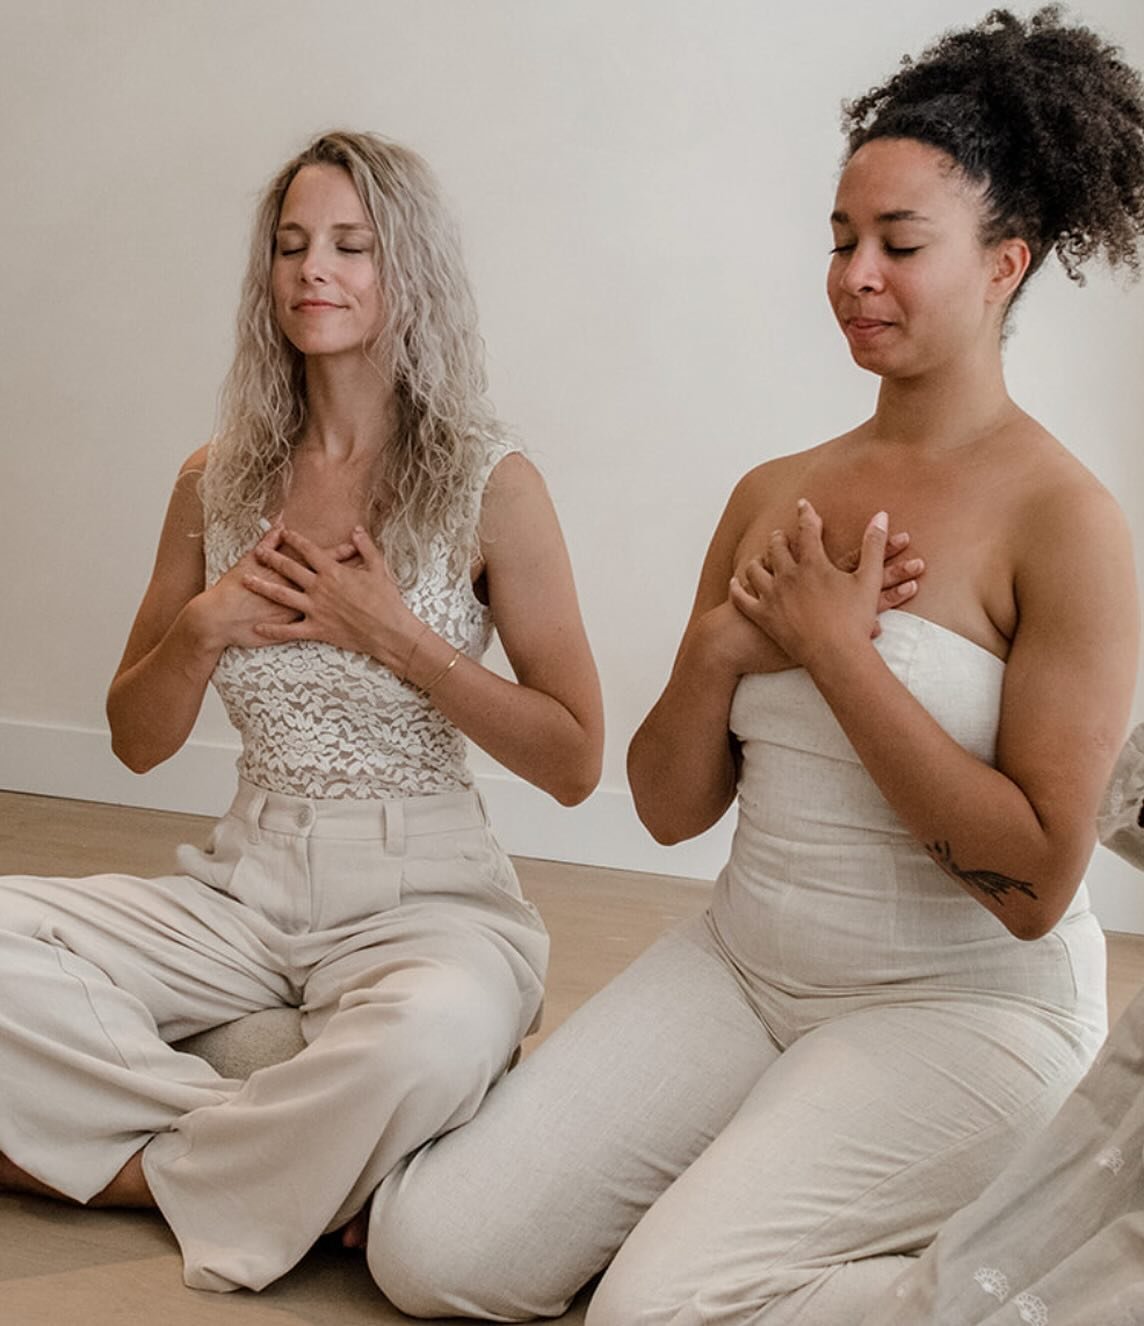 This Saturday join two of your favorite guides at Oracley @brittvndijck and @the.8.moons for a cacao &amp; reiki connection ceremony ✨

This promises to be a beautiful heartfelt journey with channeled meditations, optional sharing, oracle card readin